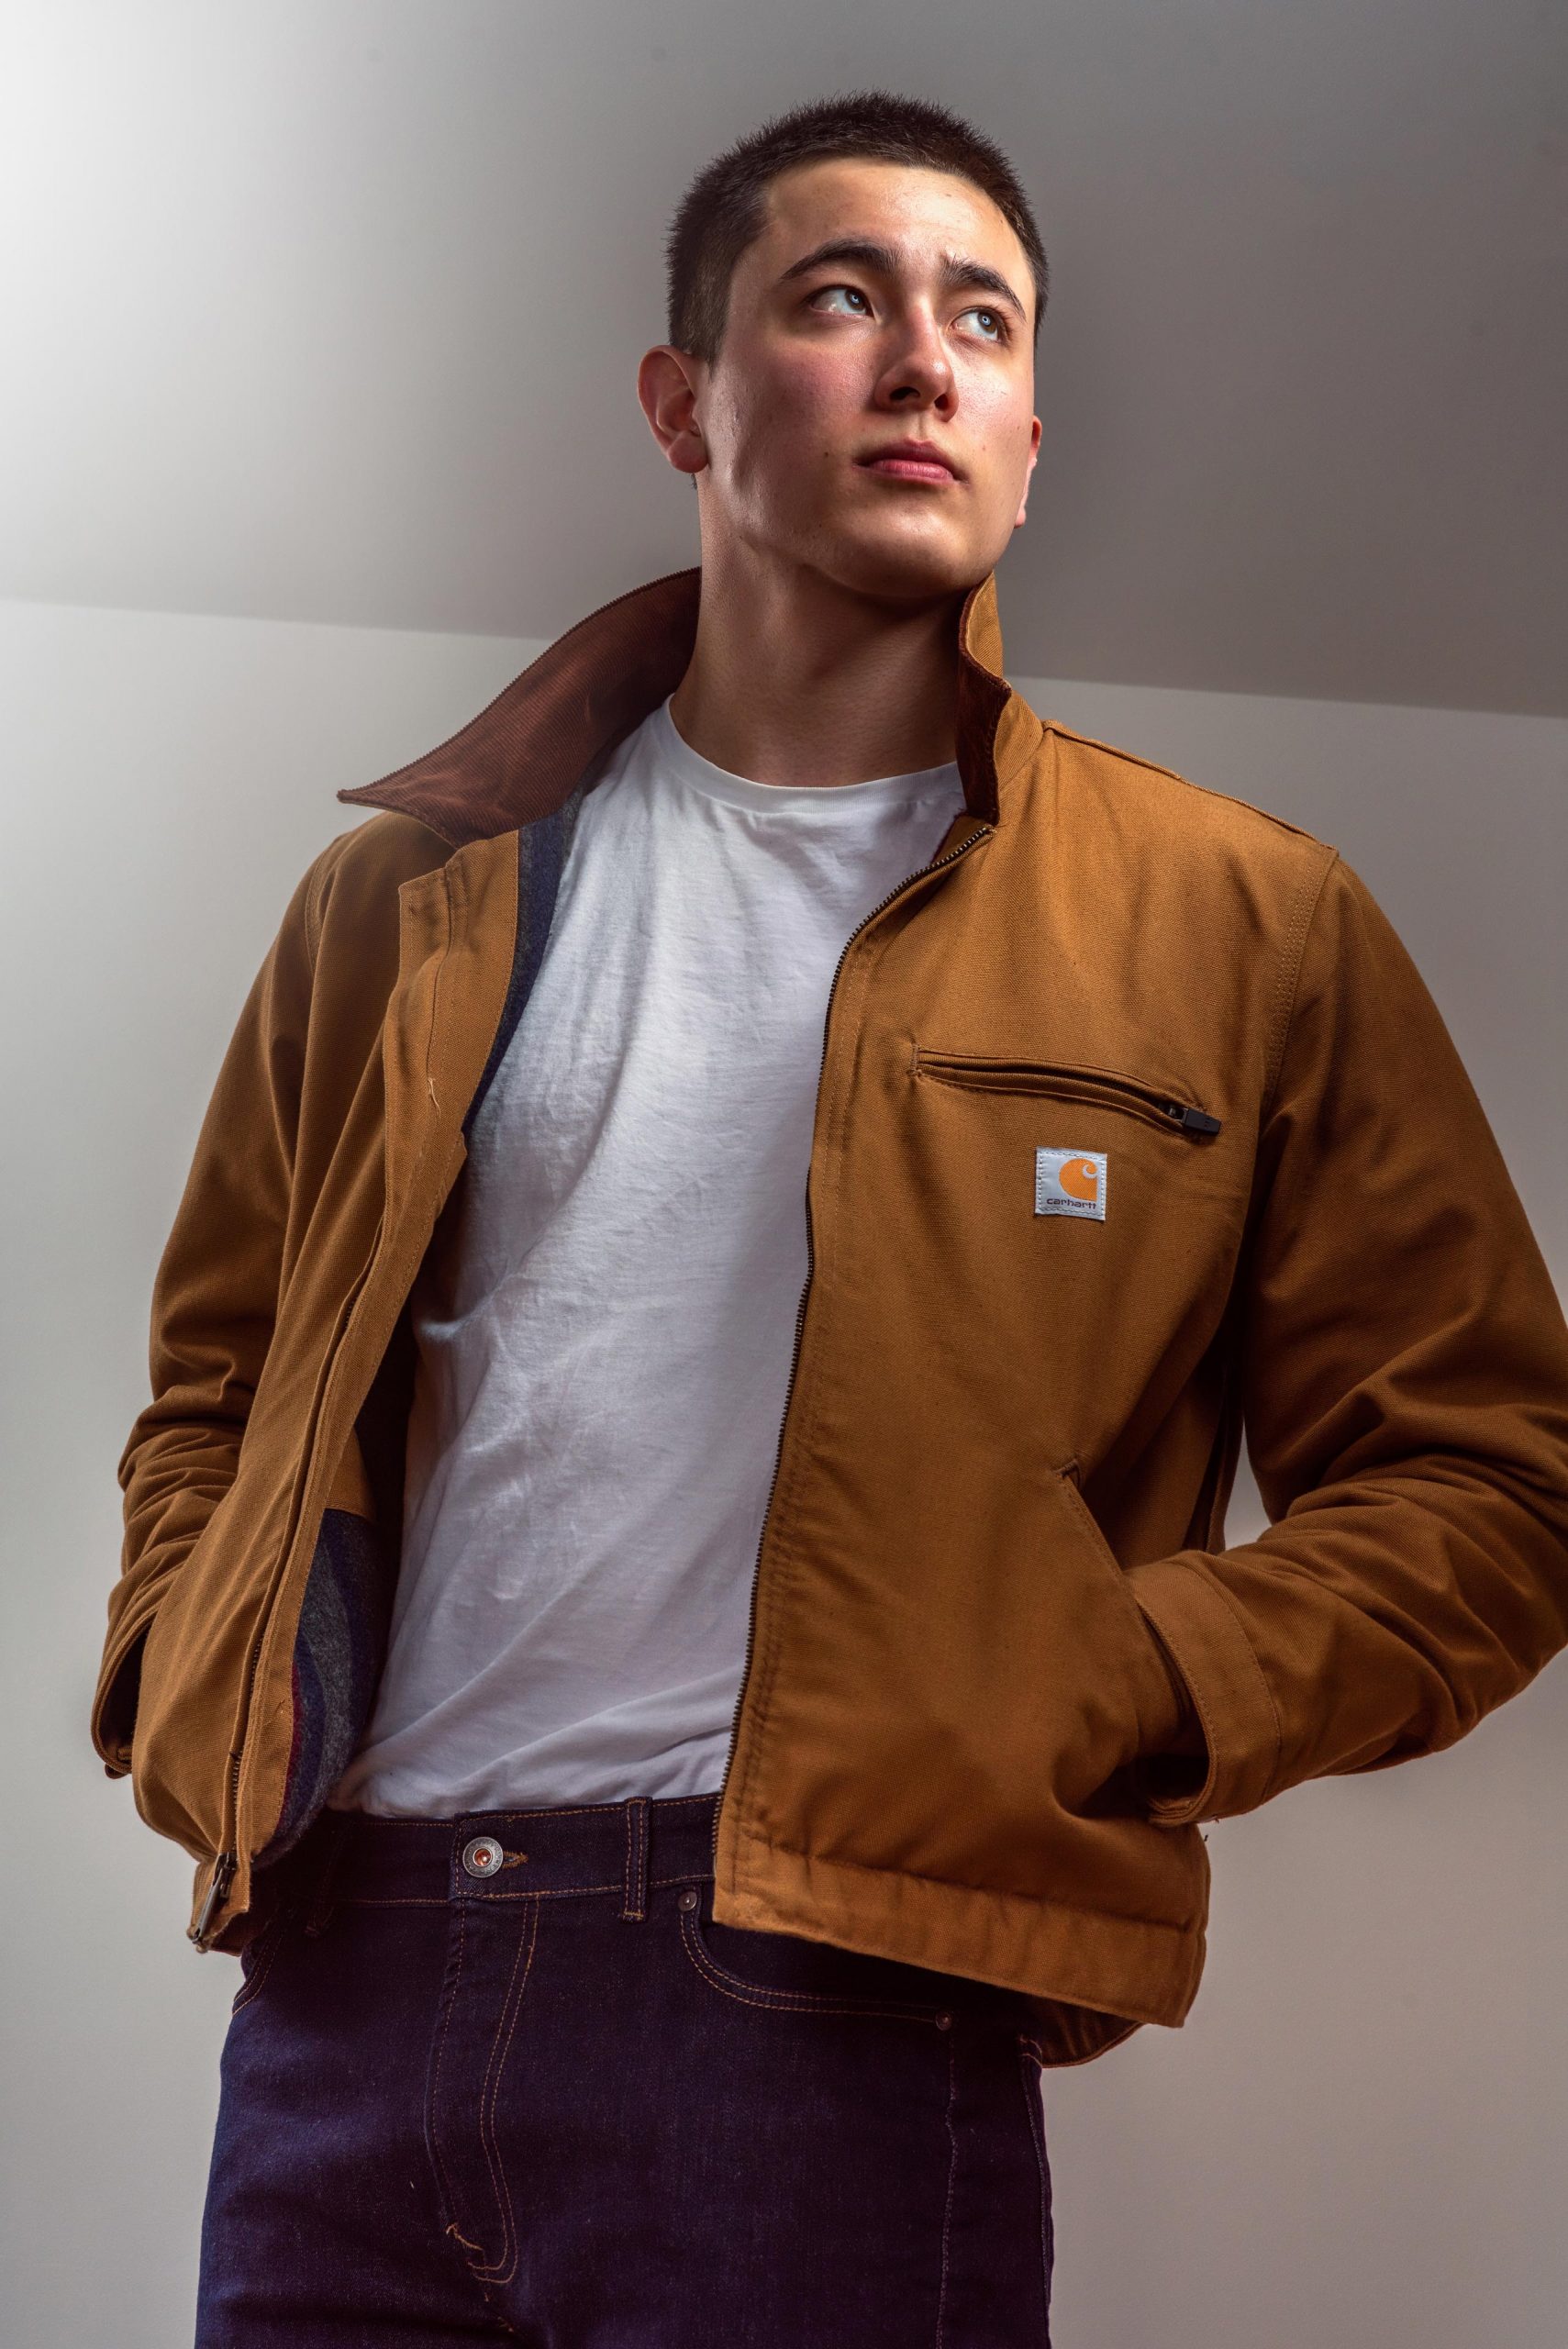 A male model wears a Carhartt jacket in a studio setting, illuminated by soft, flattering lights. He wears blue jeans and a white t-shirt while gesturing with the jacket, hands in the sandy-colored jacket's pockets.